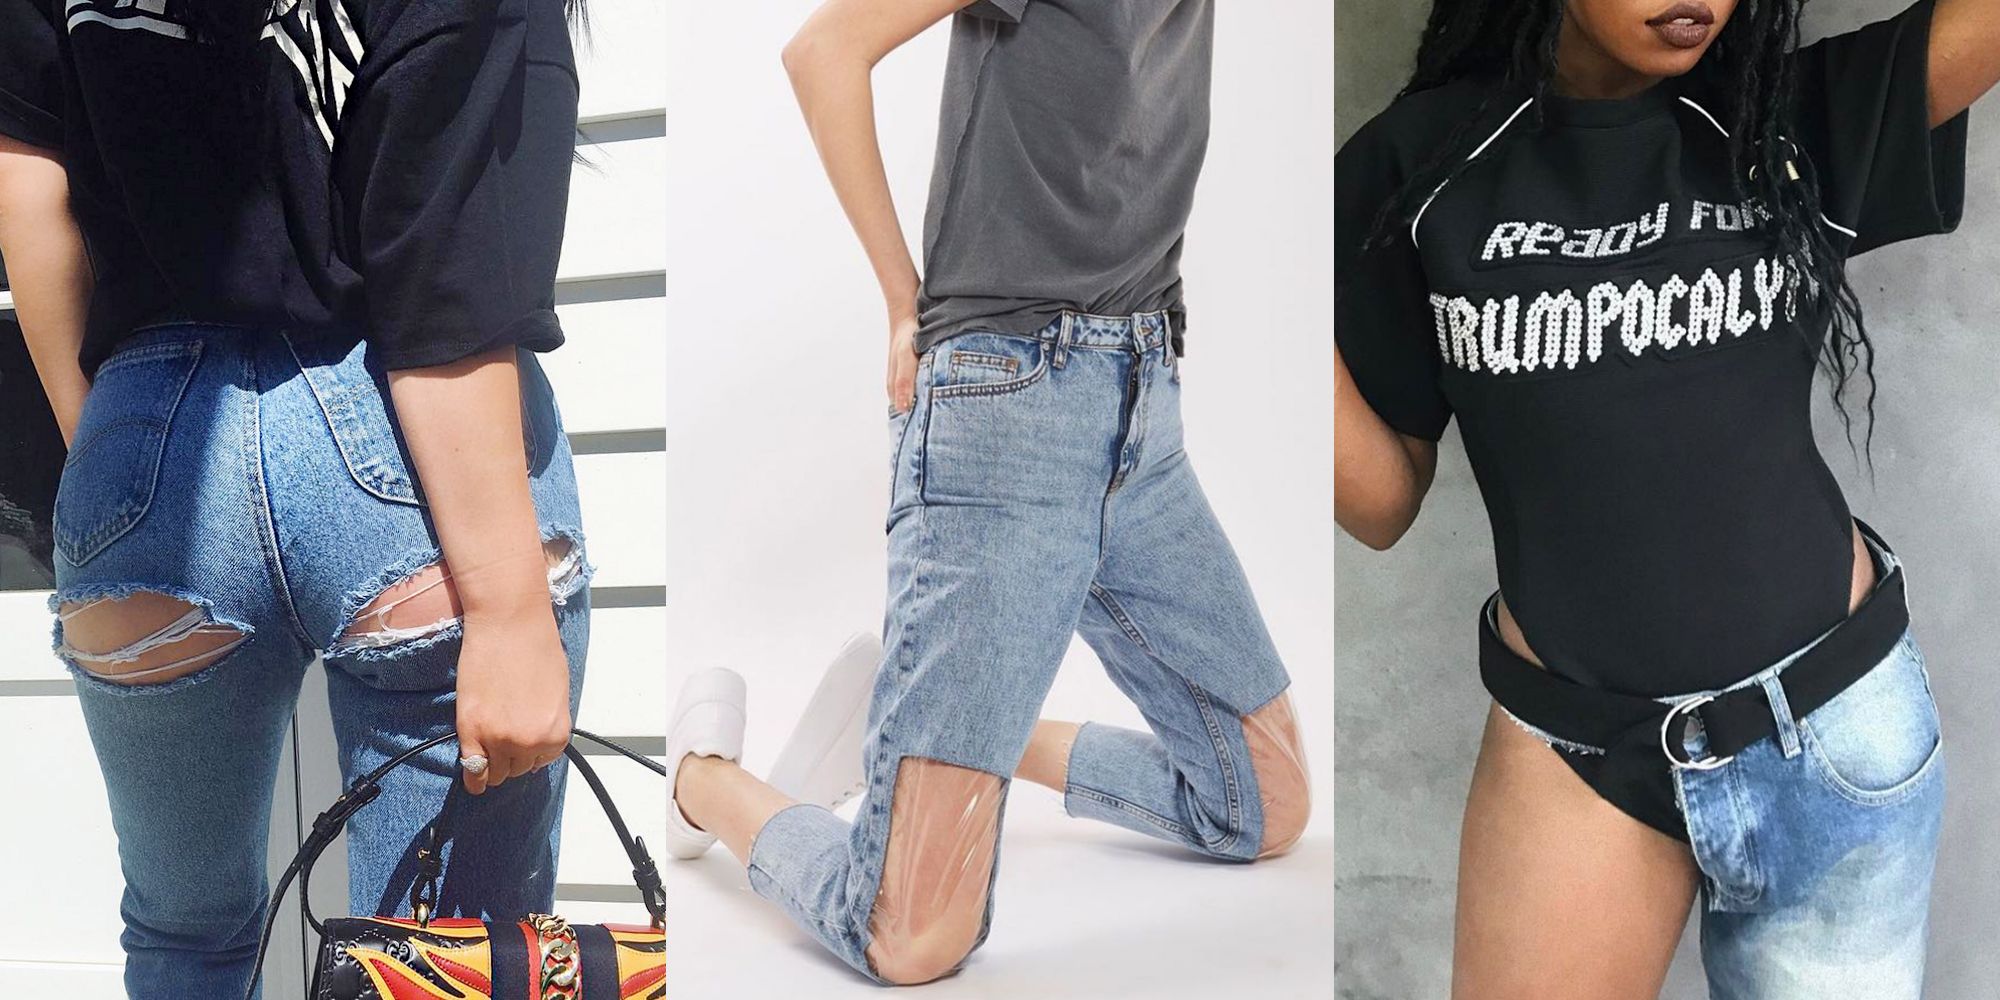 Inside-out jeans might be the most bizarre fashion trend yet